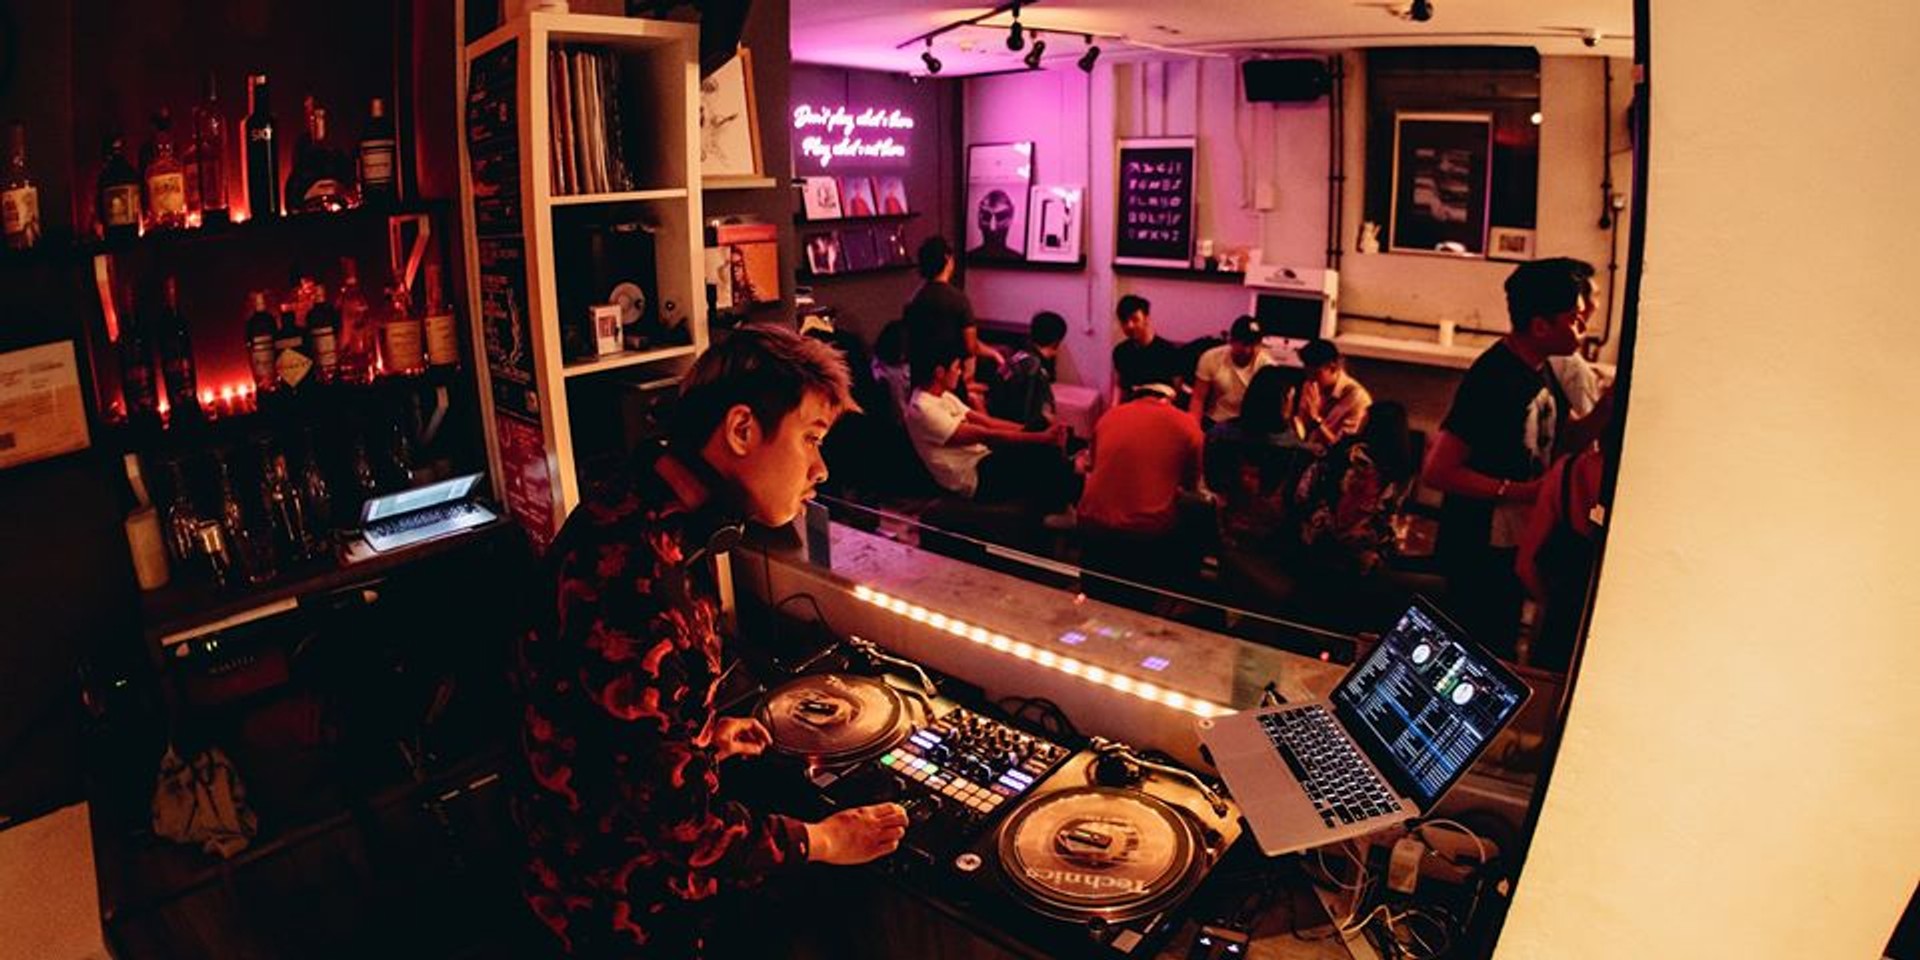 Singapore's White Label Records and Bar announces their shut down amidst COVID-19 and 5 highlights